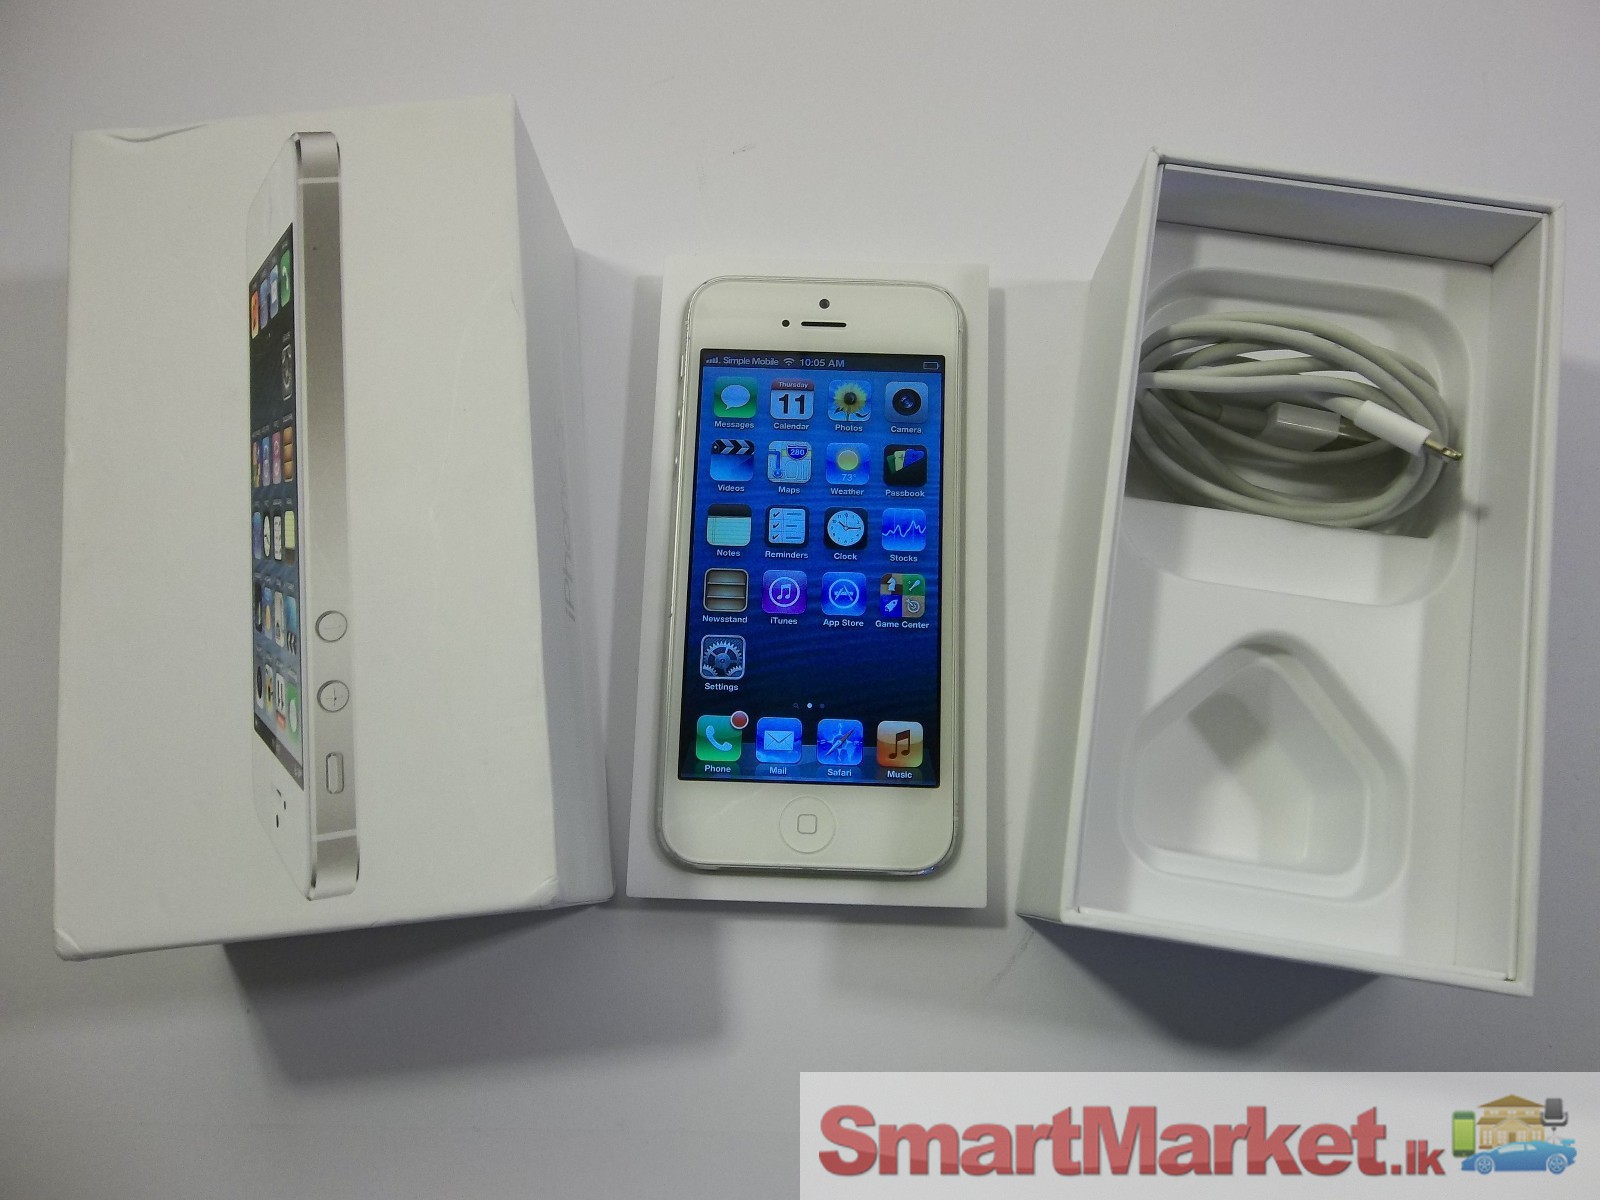 GREAT CONDITION* Apple iPhone 5 64GB White and Silver INTERNATIONAL UNLOCKED